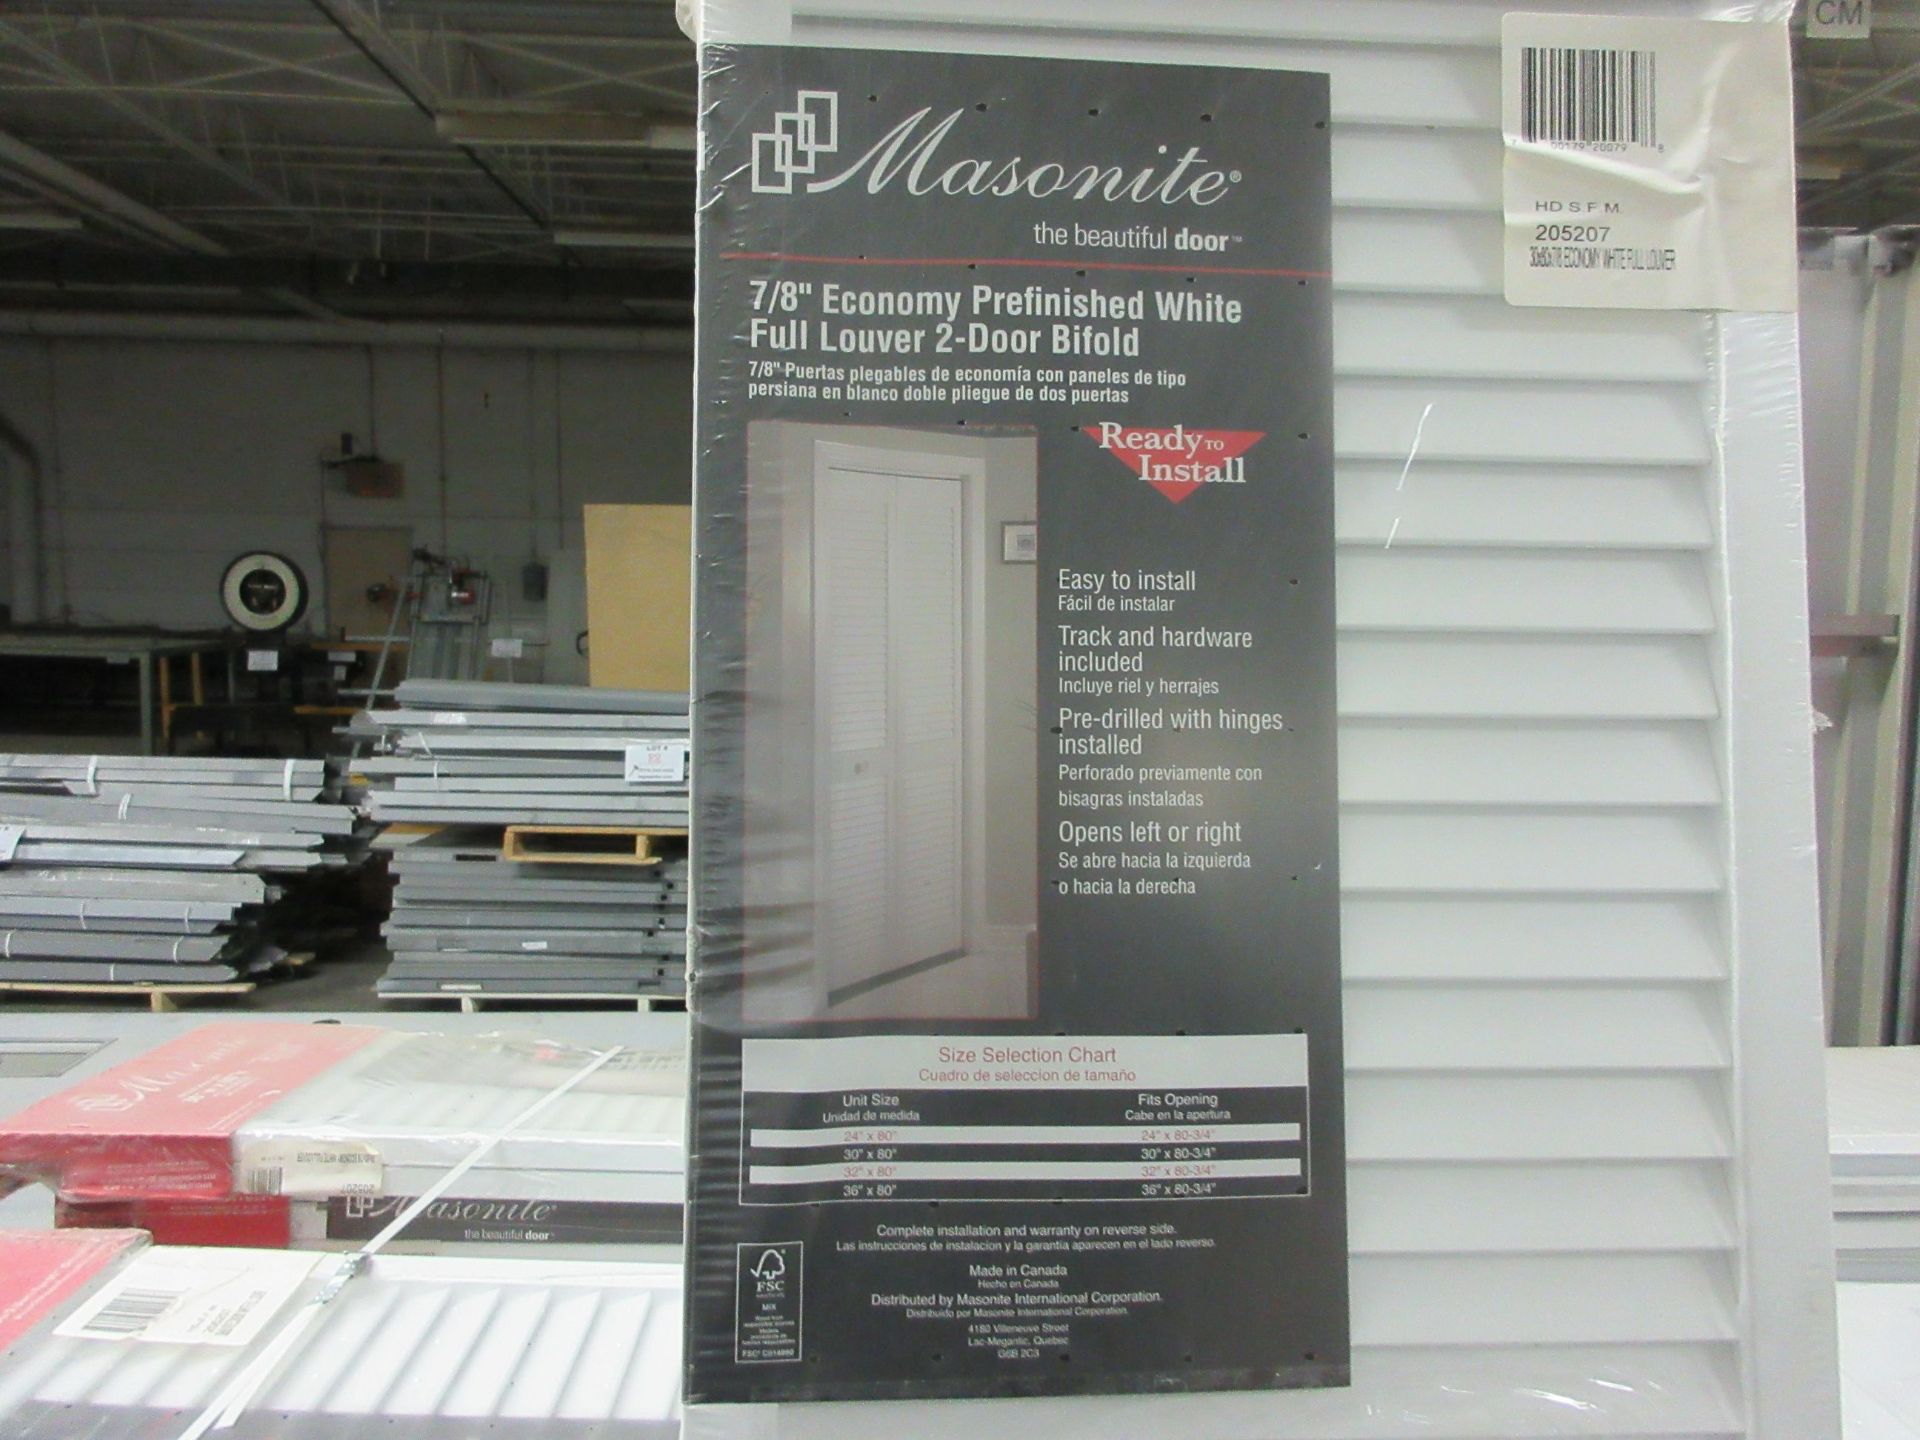 7/8" Economy prefinished white full louver 2 door bifold 36"x 80" x 3/4" (qty 42) - Image 3 of 3